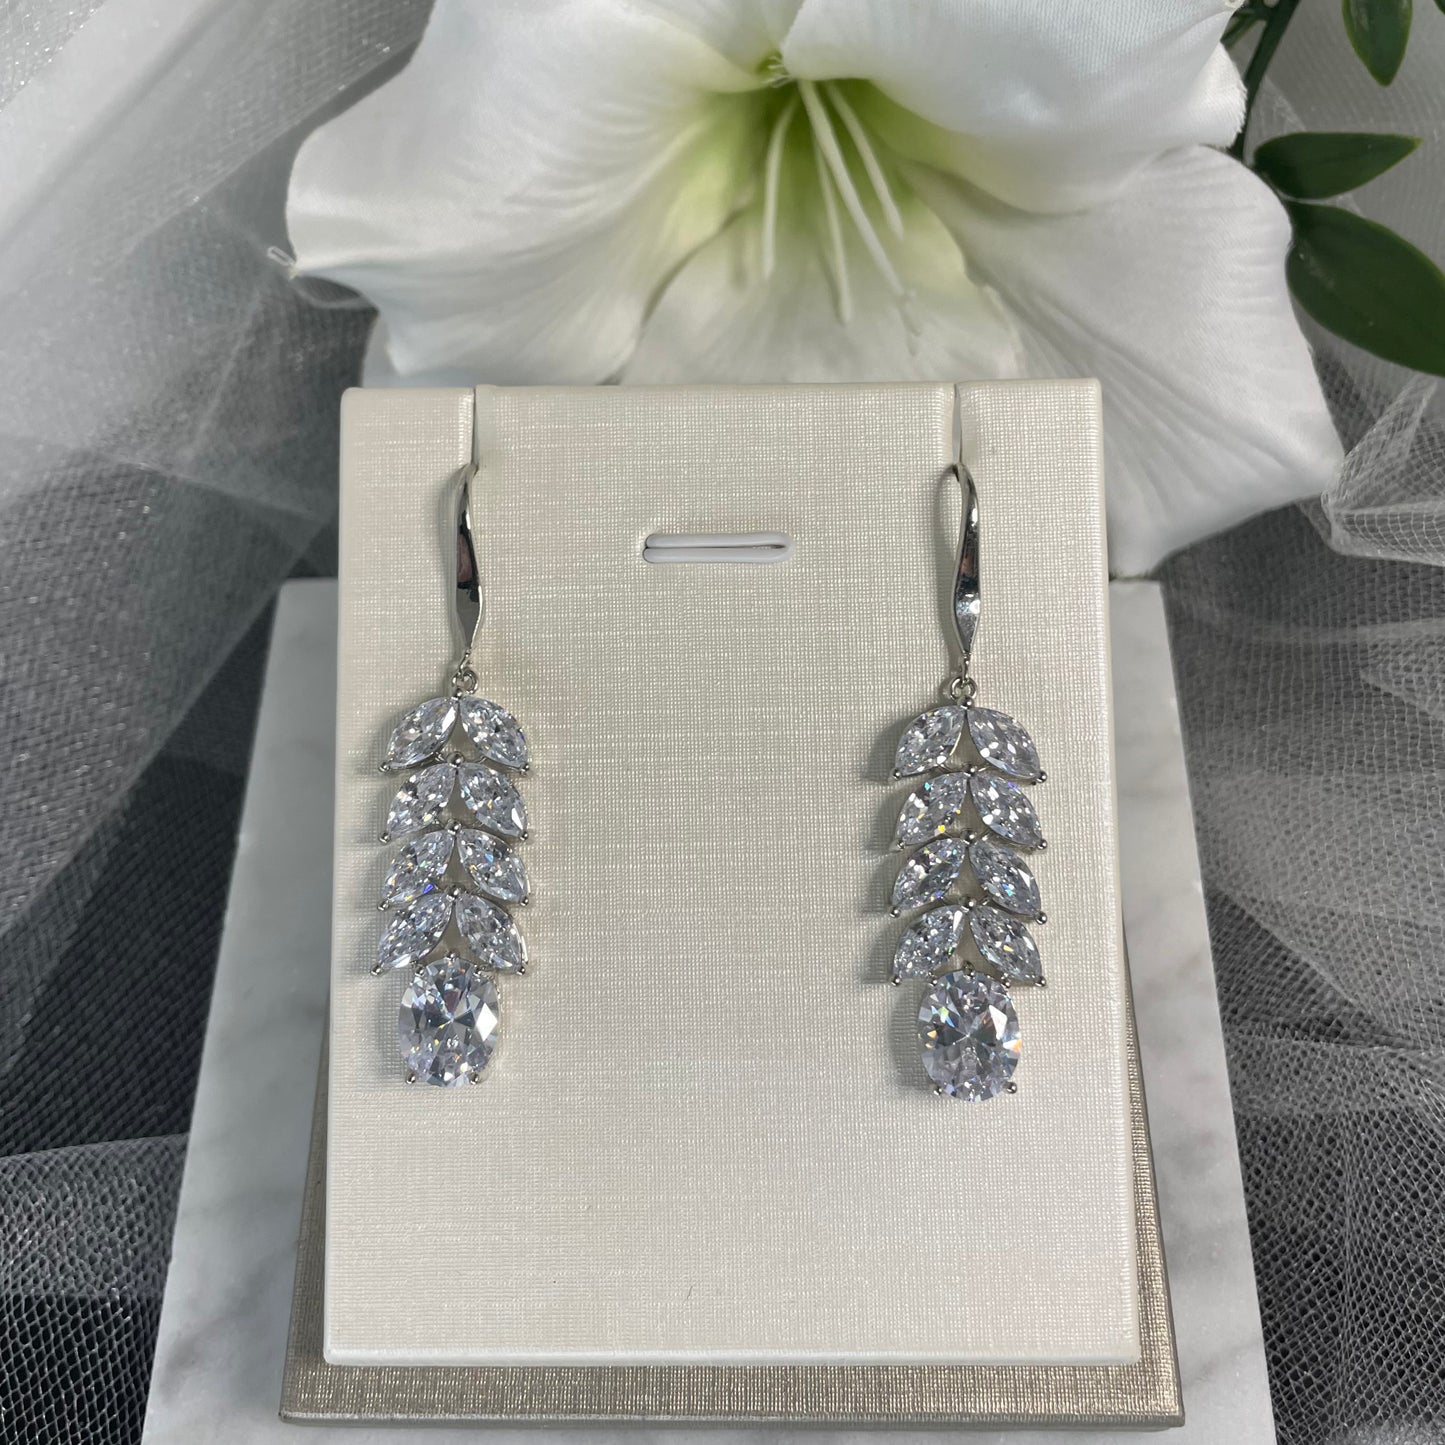 Ember 925 Silver Bridal Earrings with Sparkling Leaf Drop Zircon Stones - Divine Bridal